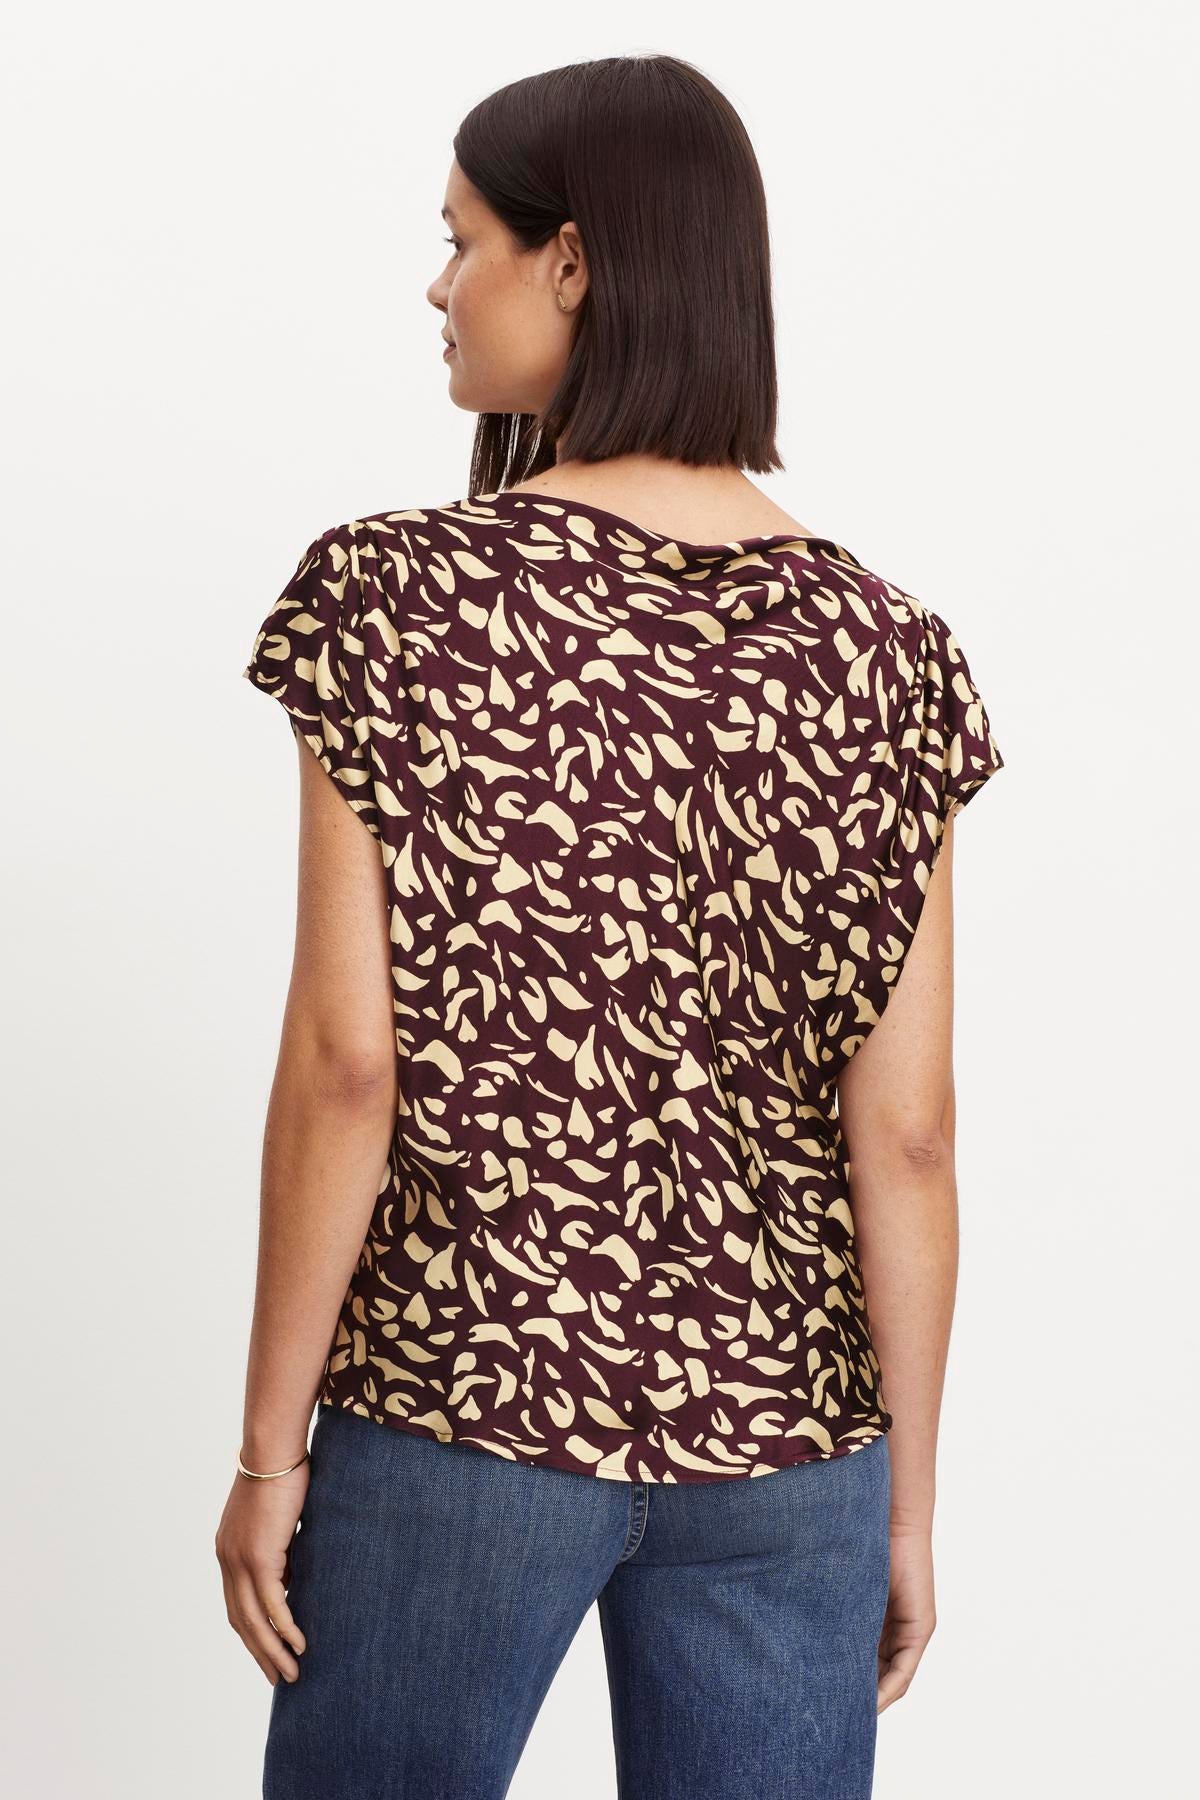 The back view of a woman wearing a Velvet by Graham & Spencer DEVI PRINTED SATIN BLOUSE.-35696205496513